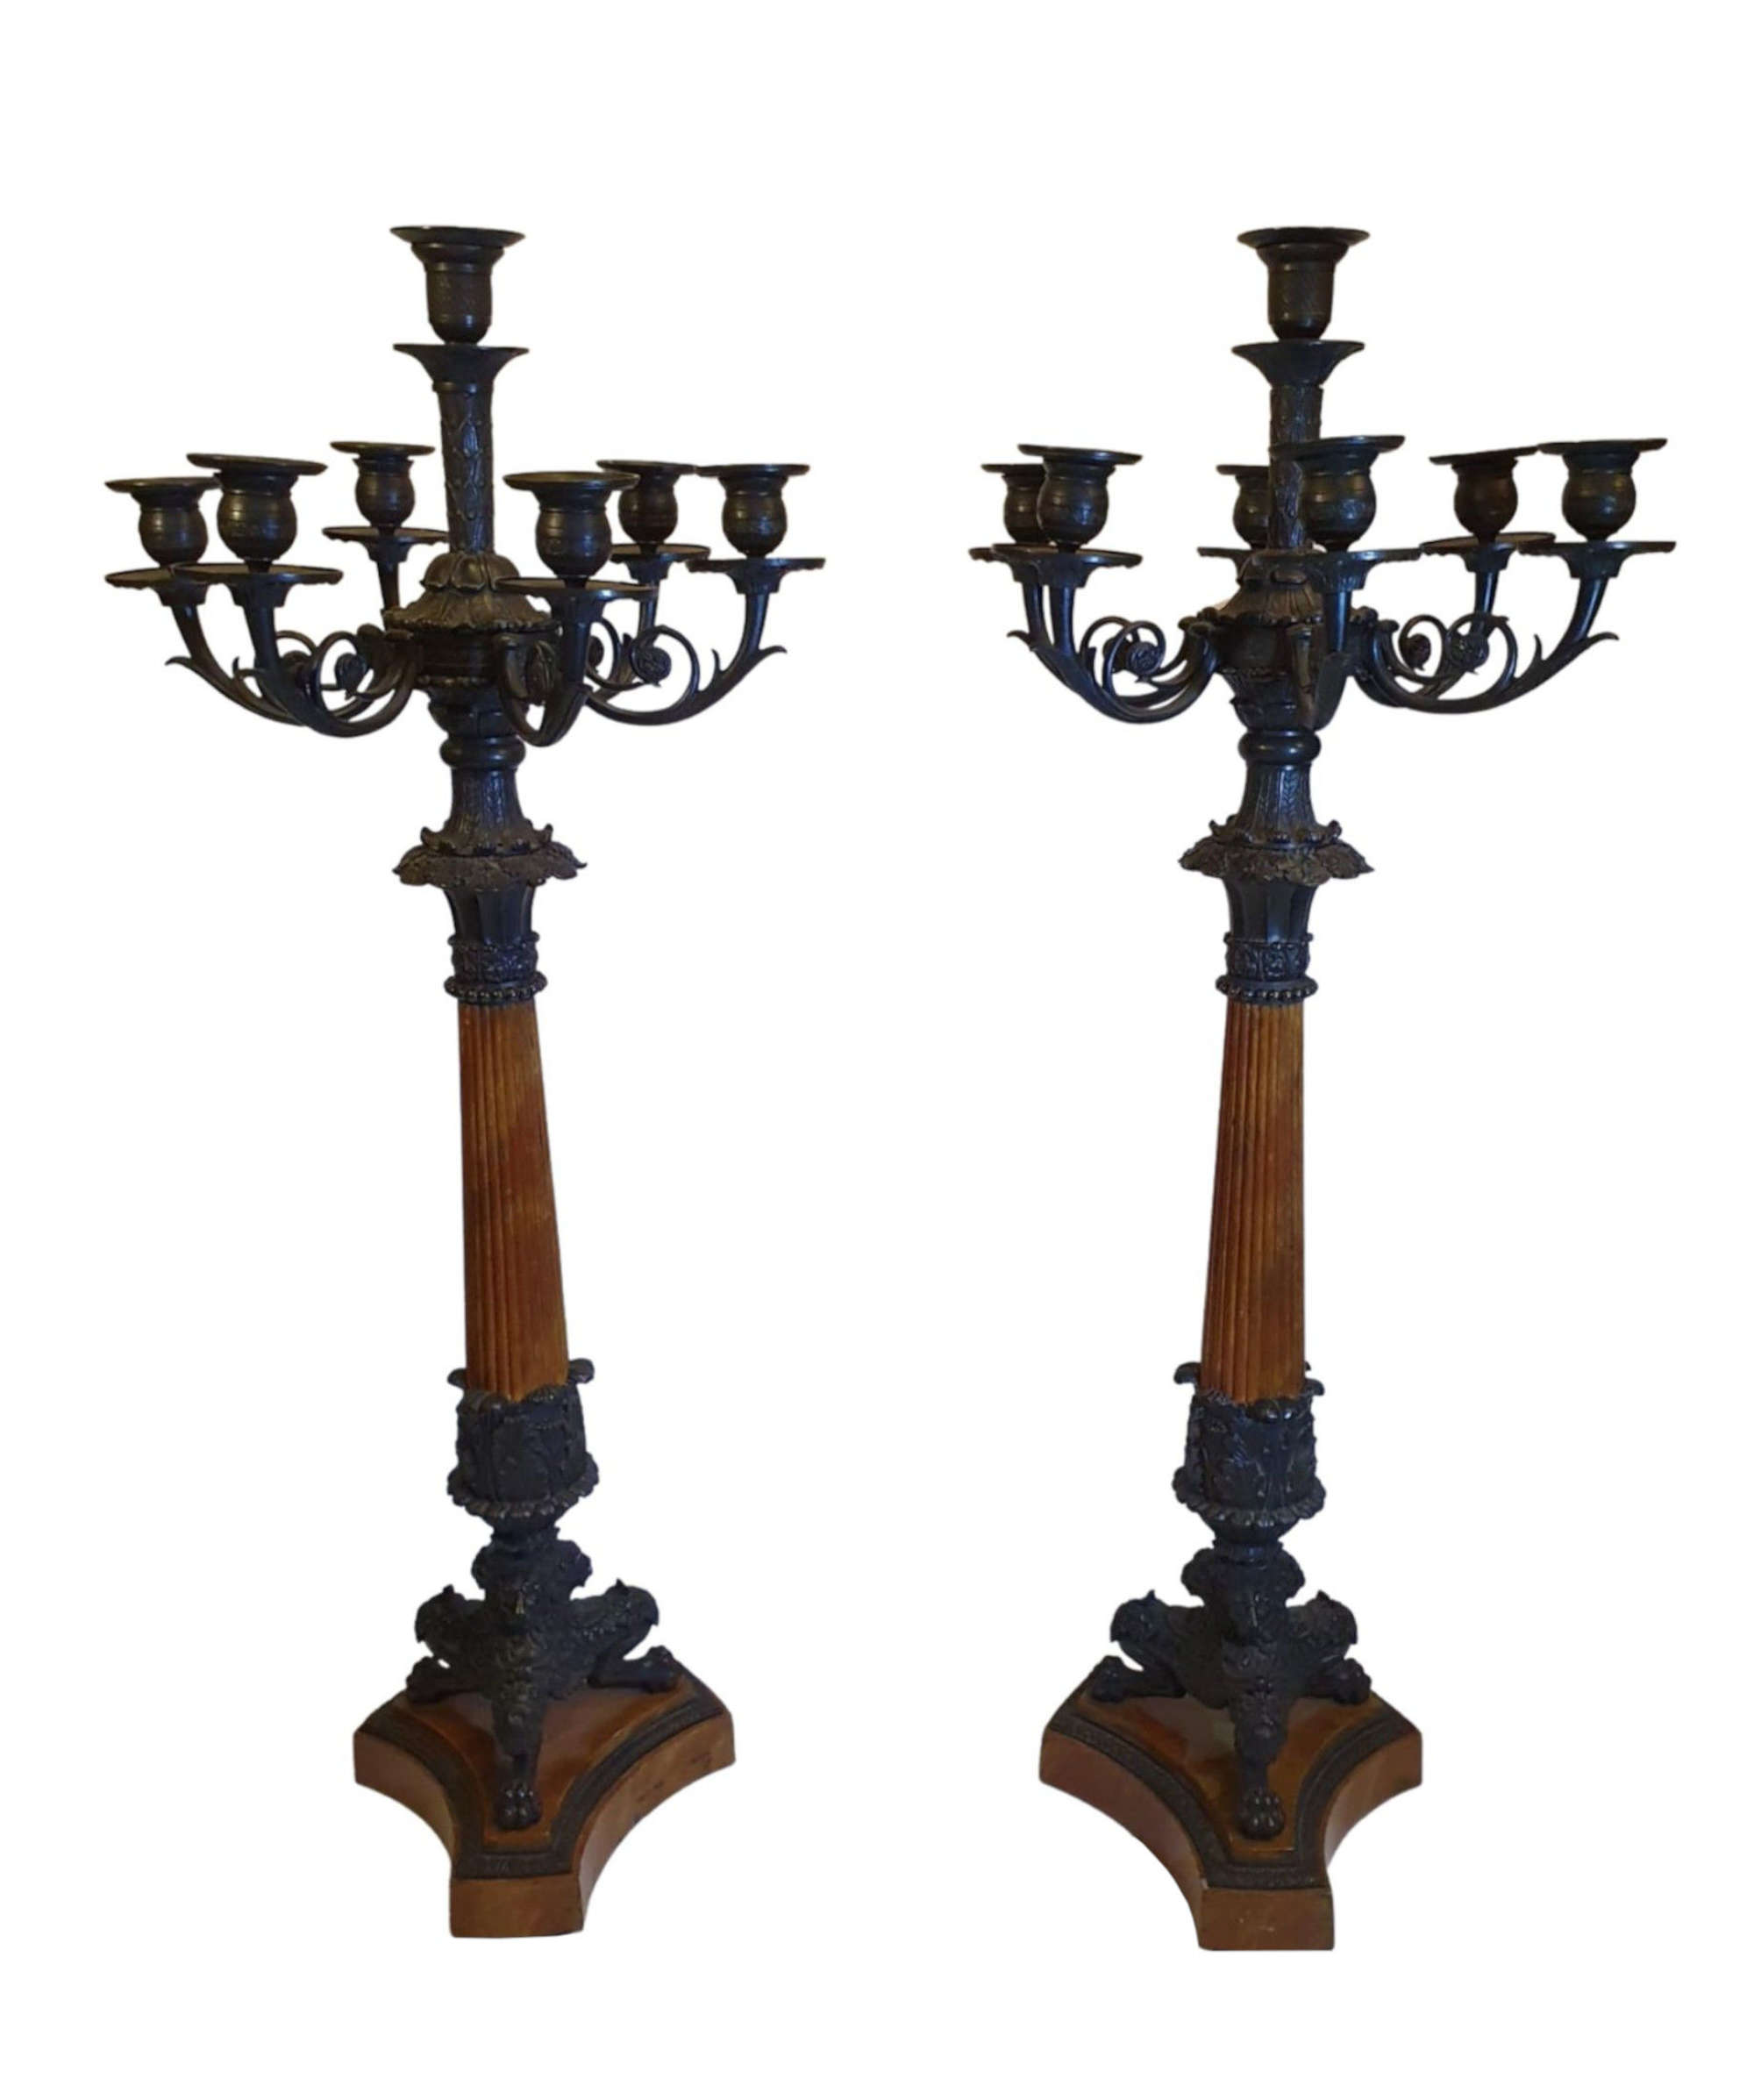 A Rare Pair Of 19th Century Bronze Antique Candelabra In The Empire Style